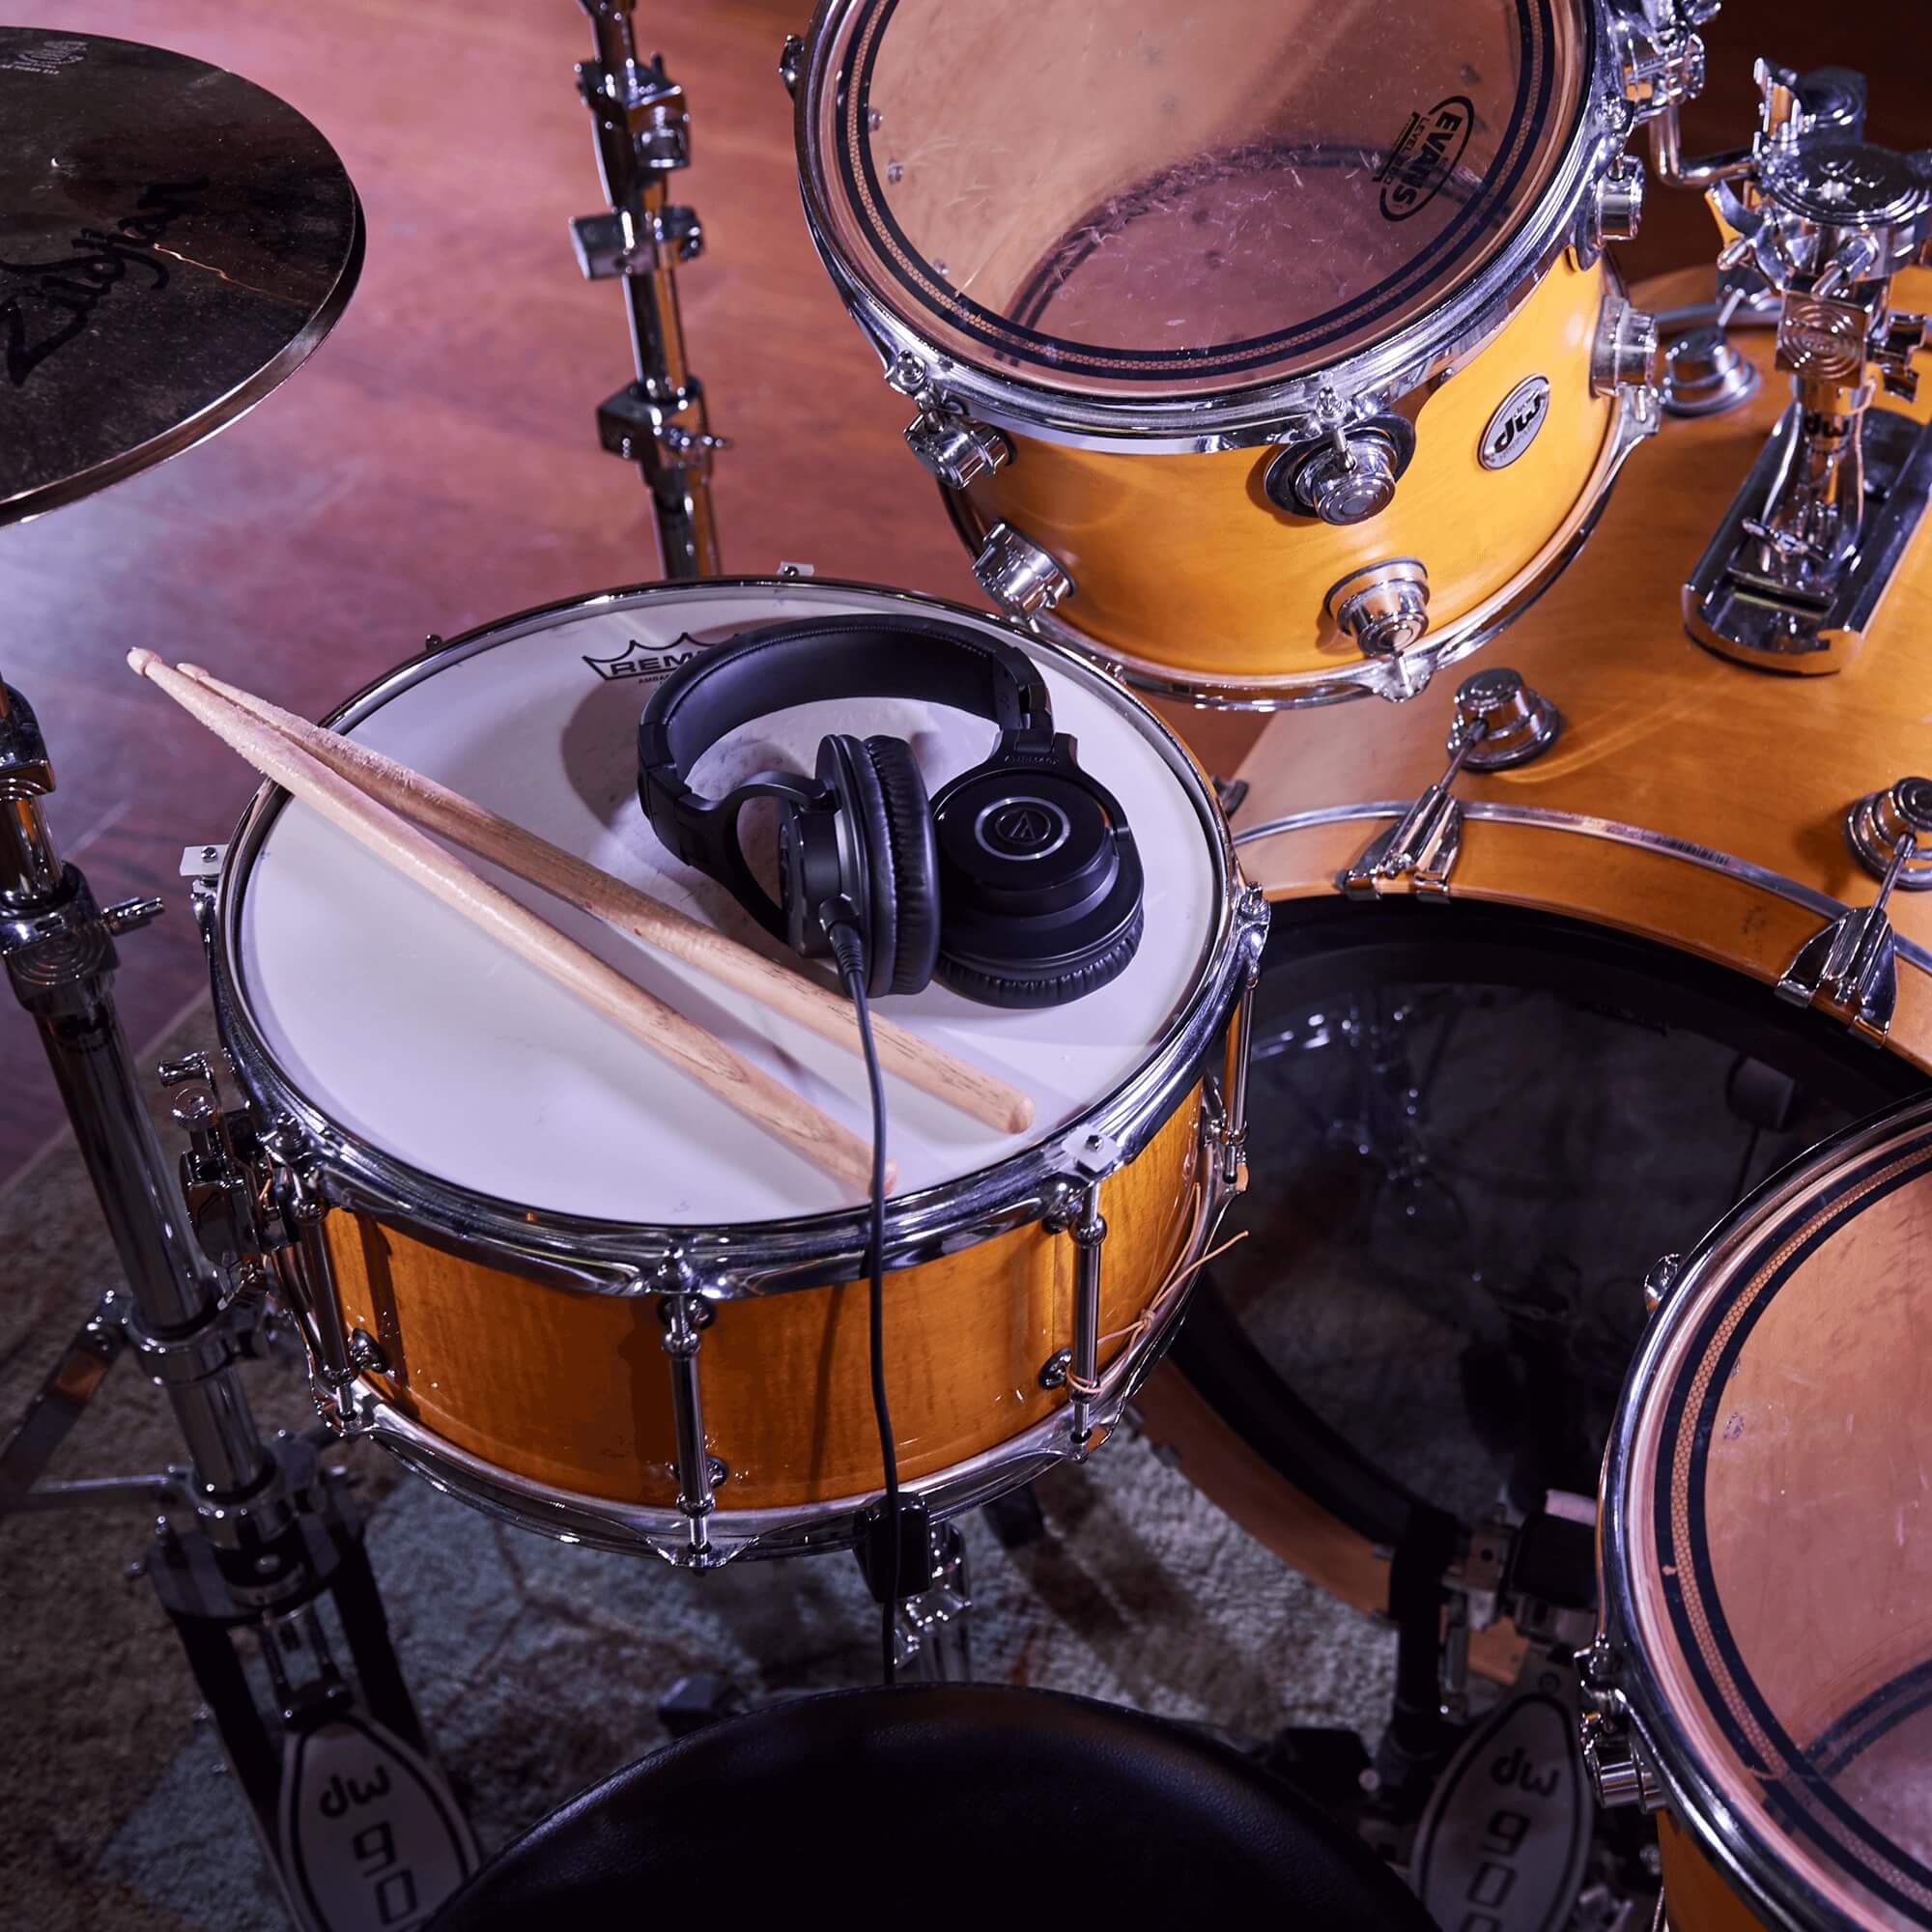 Audio-Technica ATH-M40x Professional Monitor Headphones resting on top of a snare drum